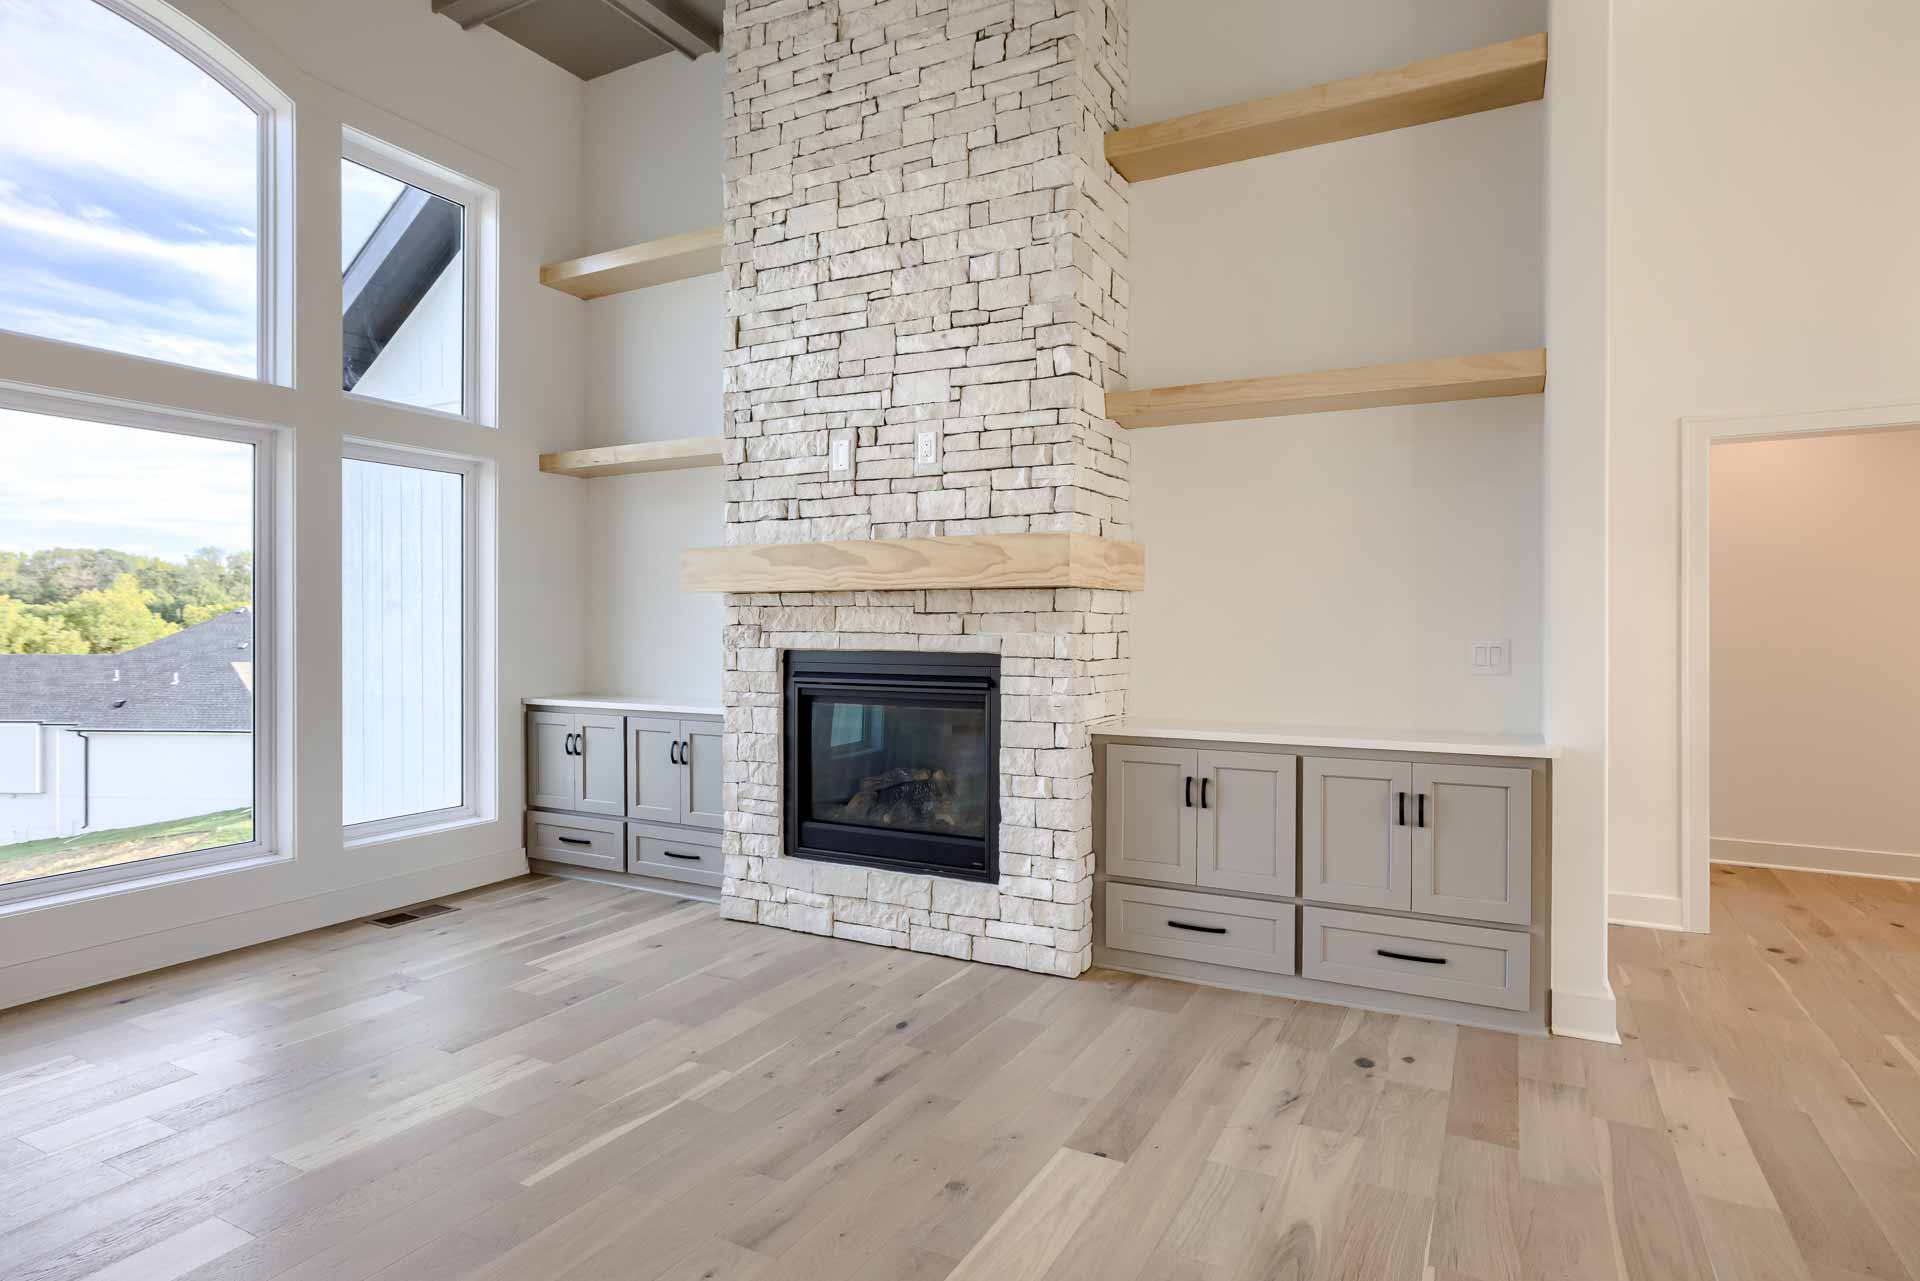 Stone fireplace in high-ceiling living room with custom built-ins.